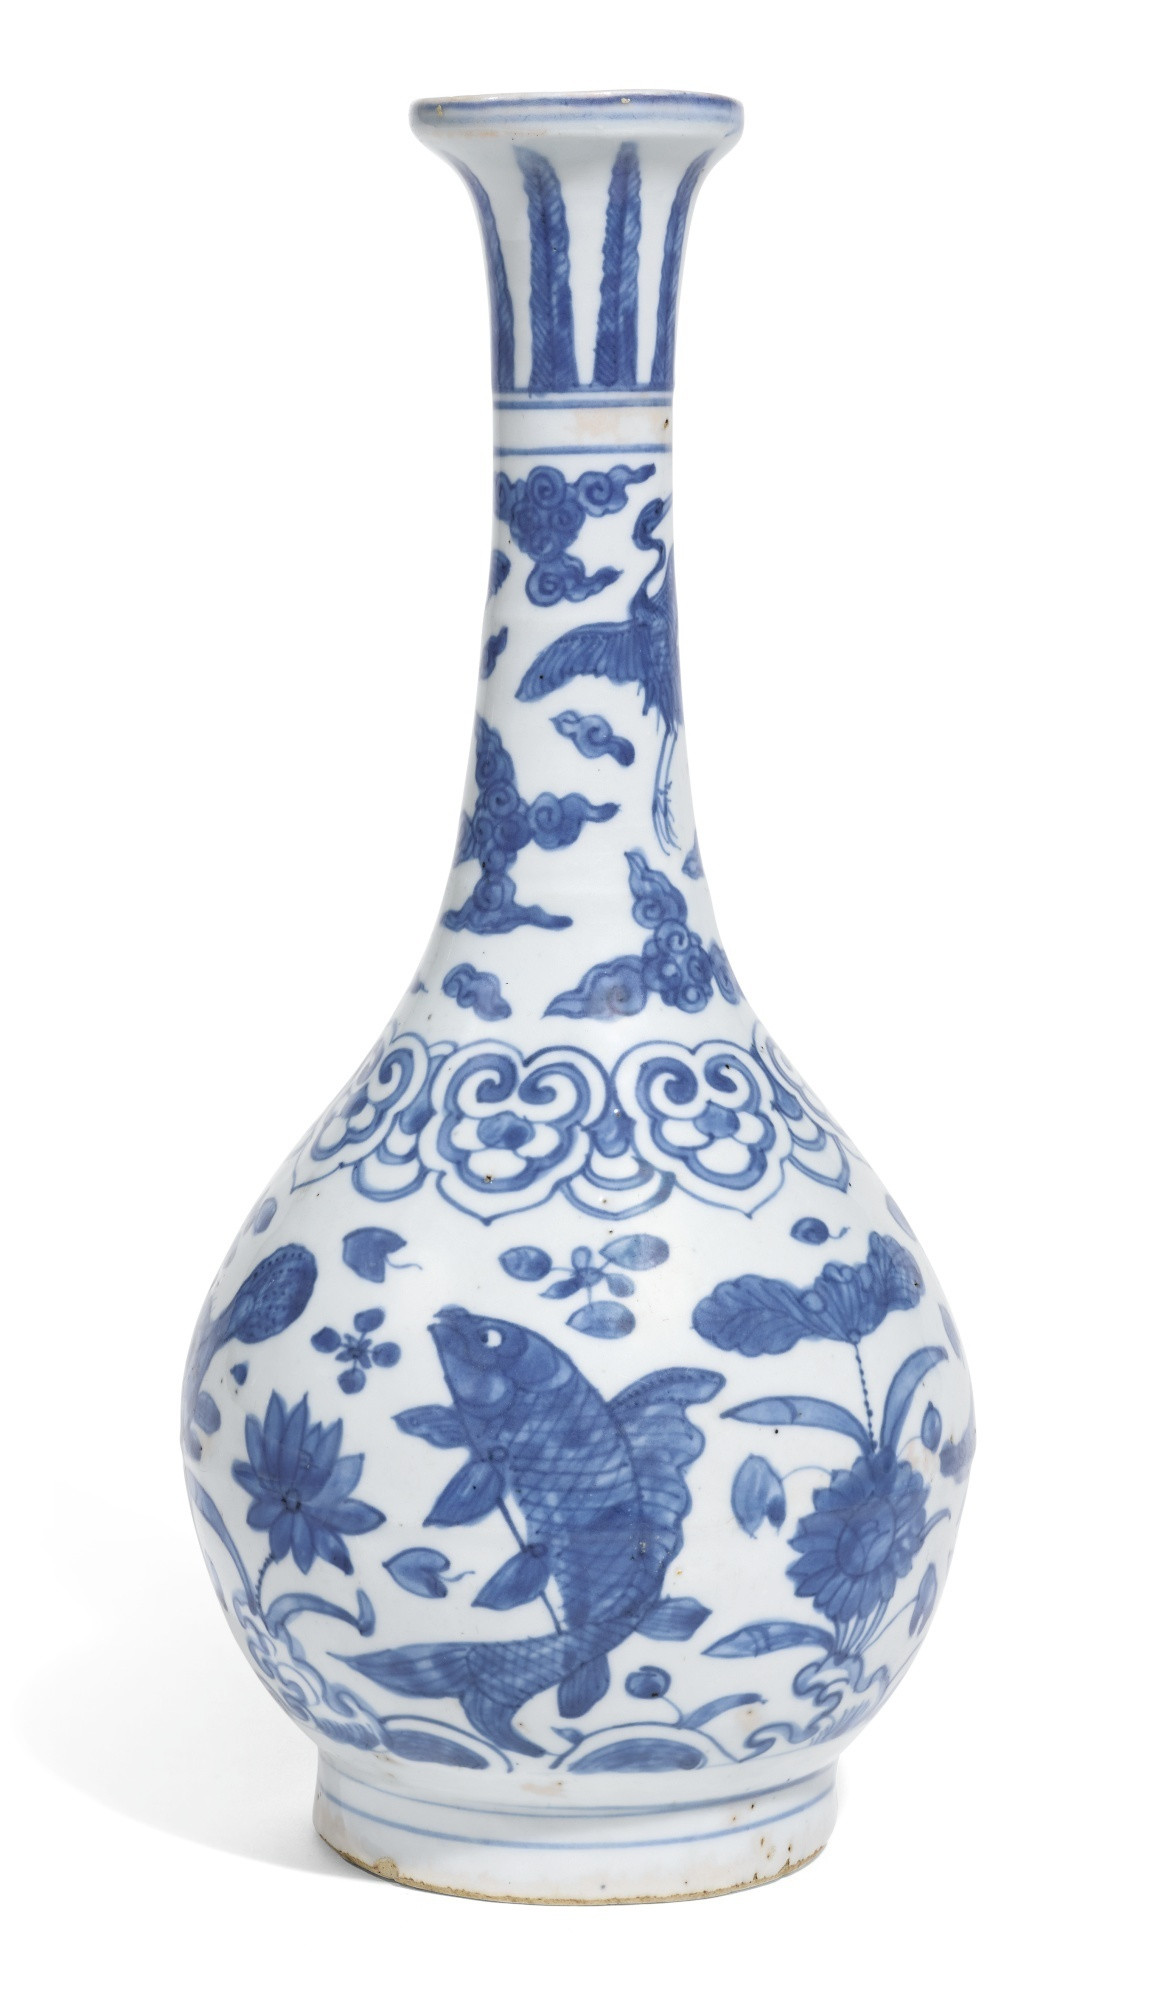 24 Fabulous Hall Pottery Vase 2024 free download hall pottery vase of an unusual blue and white ming vase yuhuchun ping with fish with an unusual blue and white ming vase yuhuchun ping with fish decoration